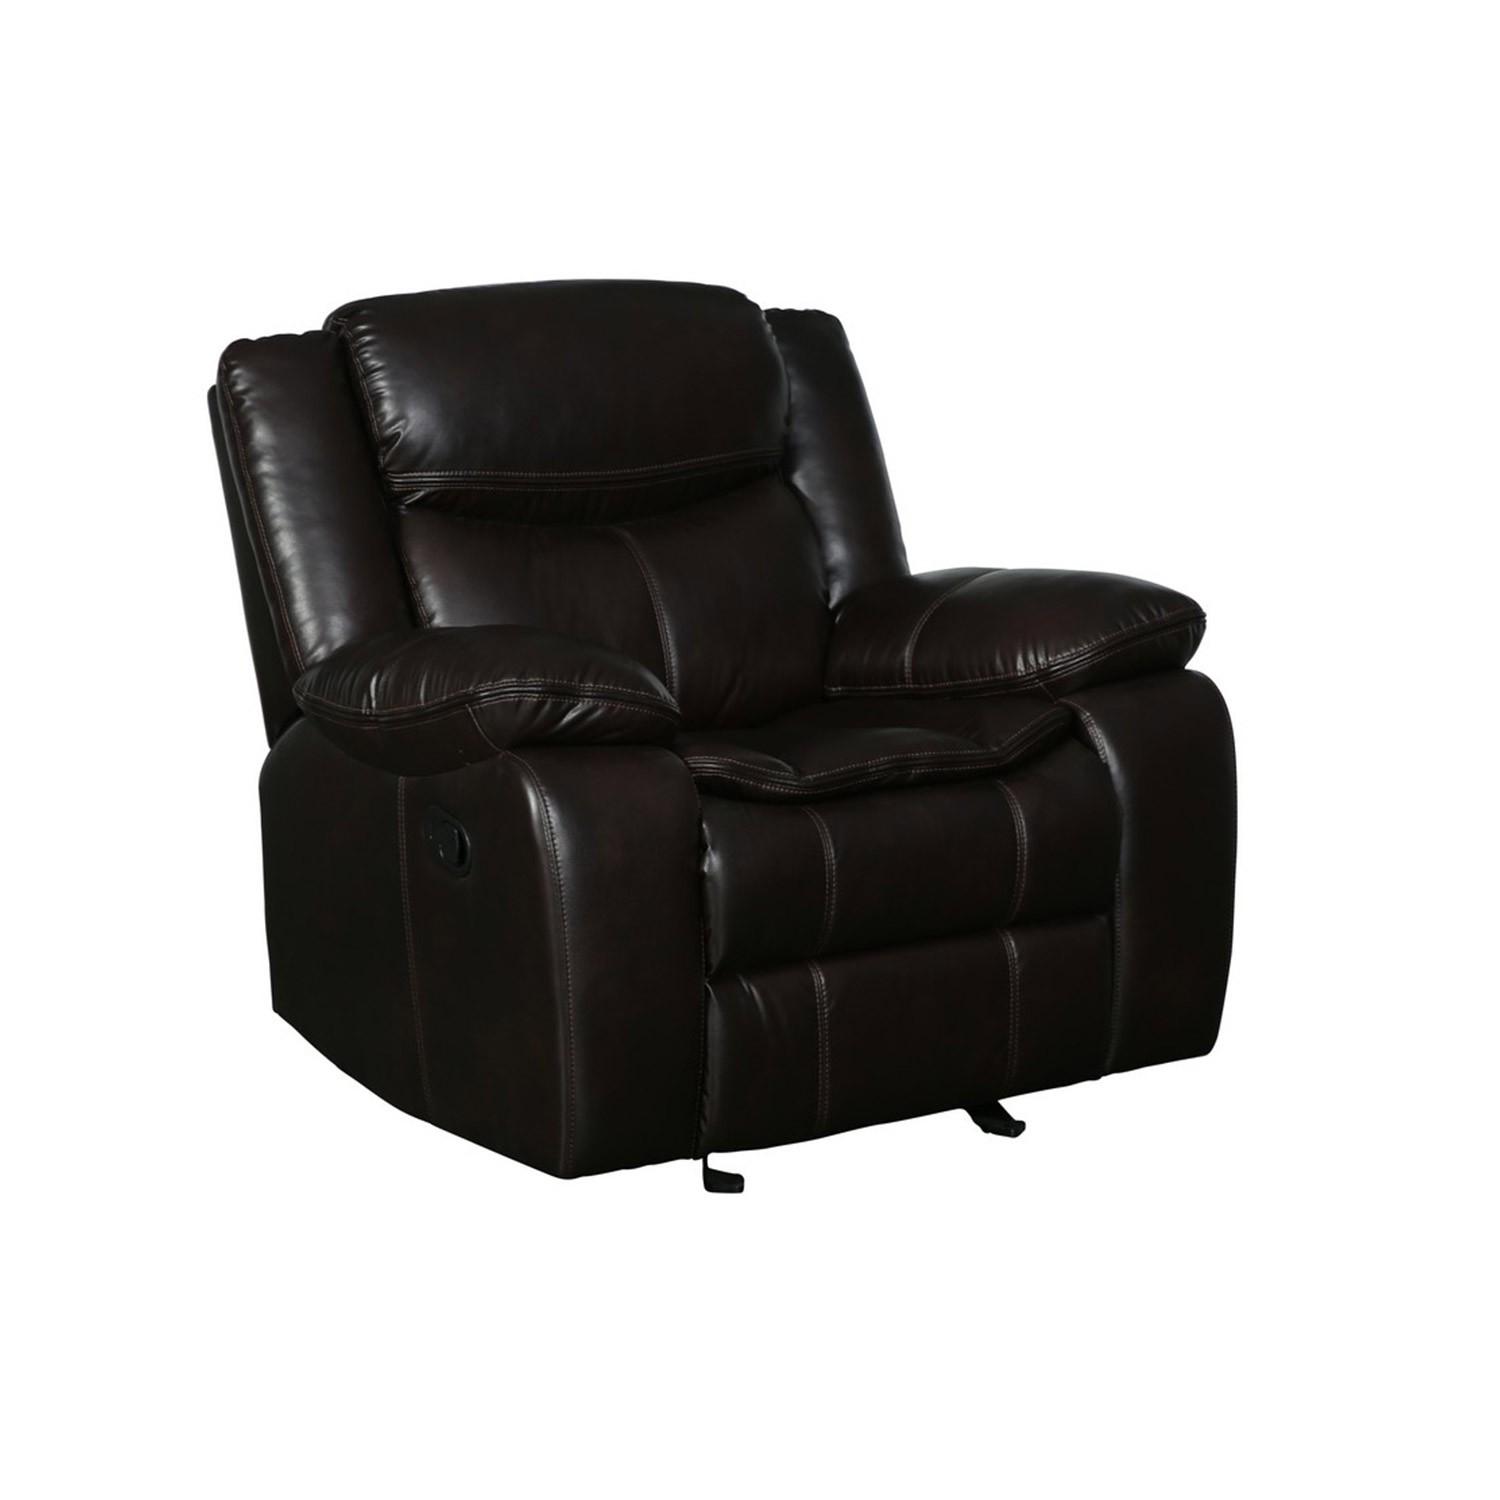 Contemporary Reclining Chair 6967 Reclining Chair 6967-BROWN-CH 6967-BROWN-CH in Brown leather Air